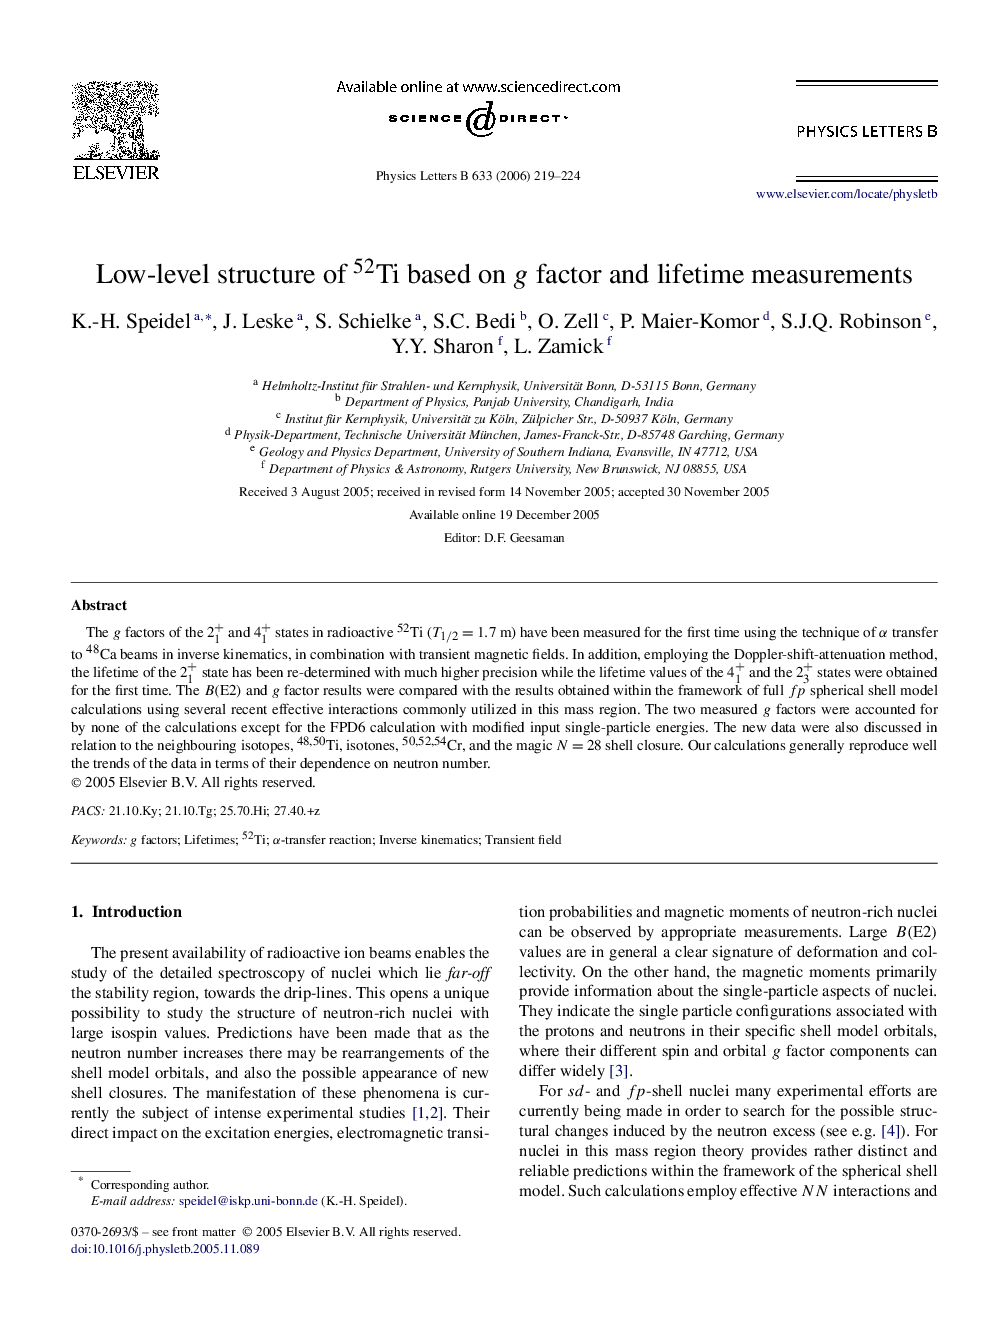 Low-level structure of 52Ti based on g factor and lifetime measurements